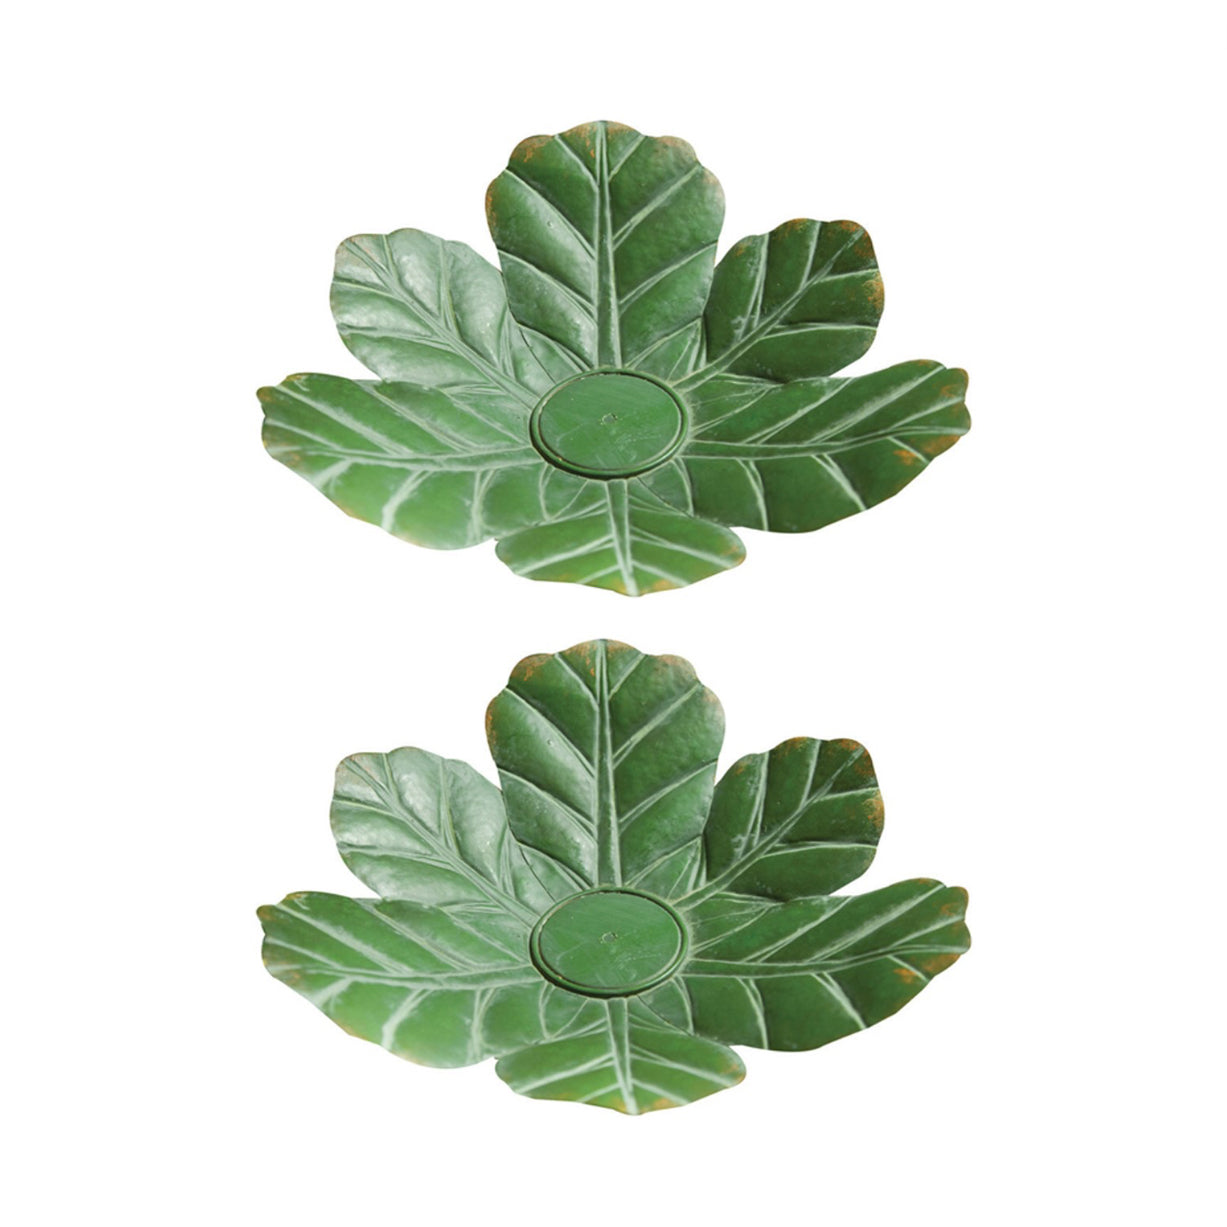 Leaf Bowl Set- 2 Decorative Metal Bowls for your Tropical Nursery, RV, Home, or Office